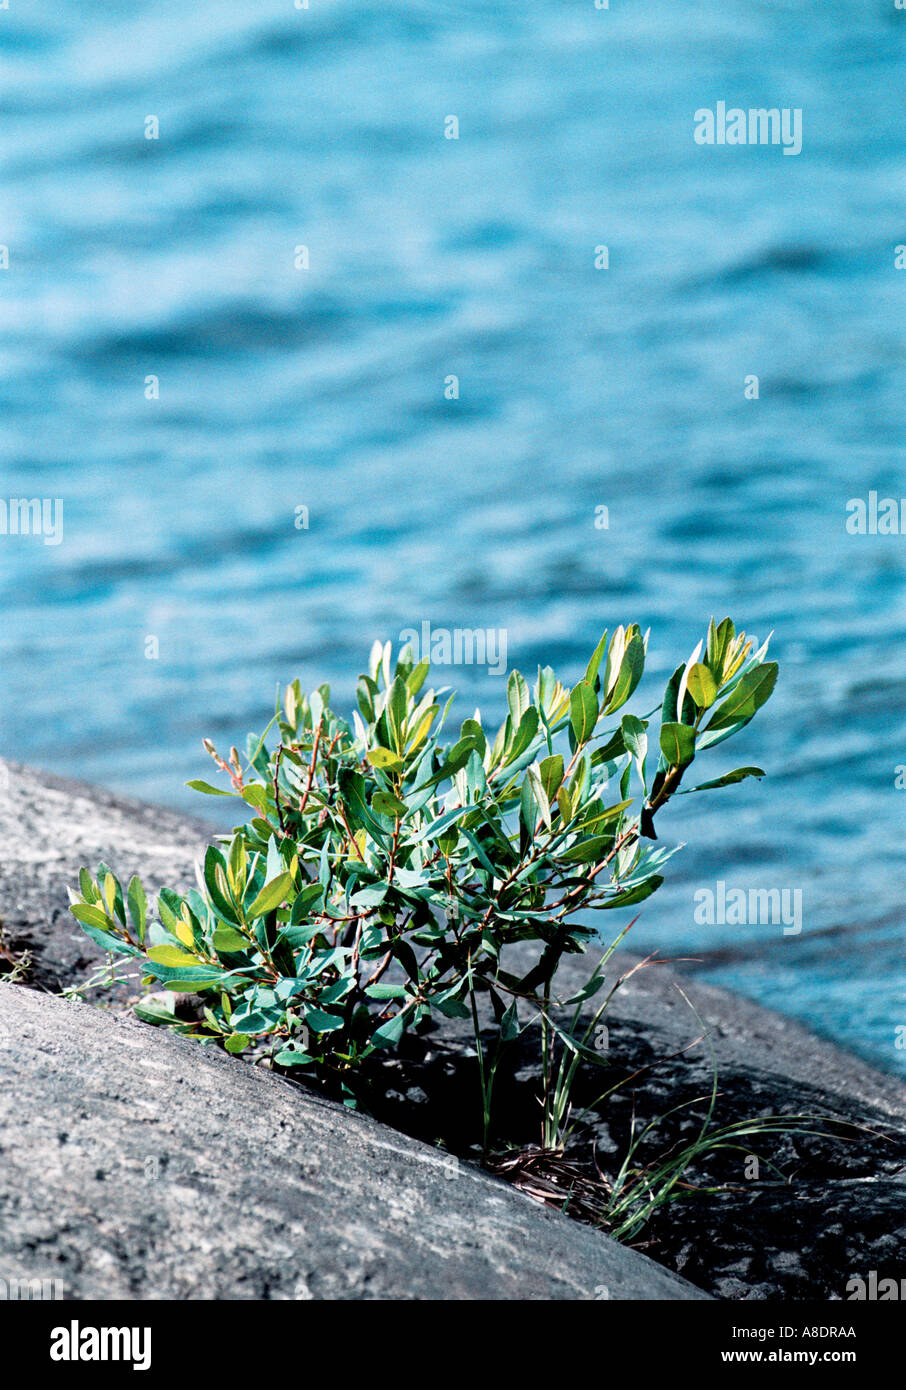 Eared willow SALICACEAE SALIX AURITA growing in a rock crack by a lake at M ja island in the archipelago of Stockholm Sweden Stock Photo